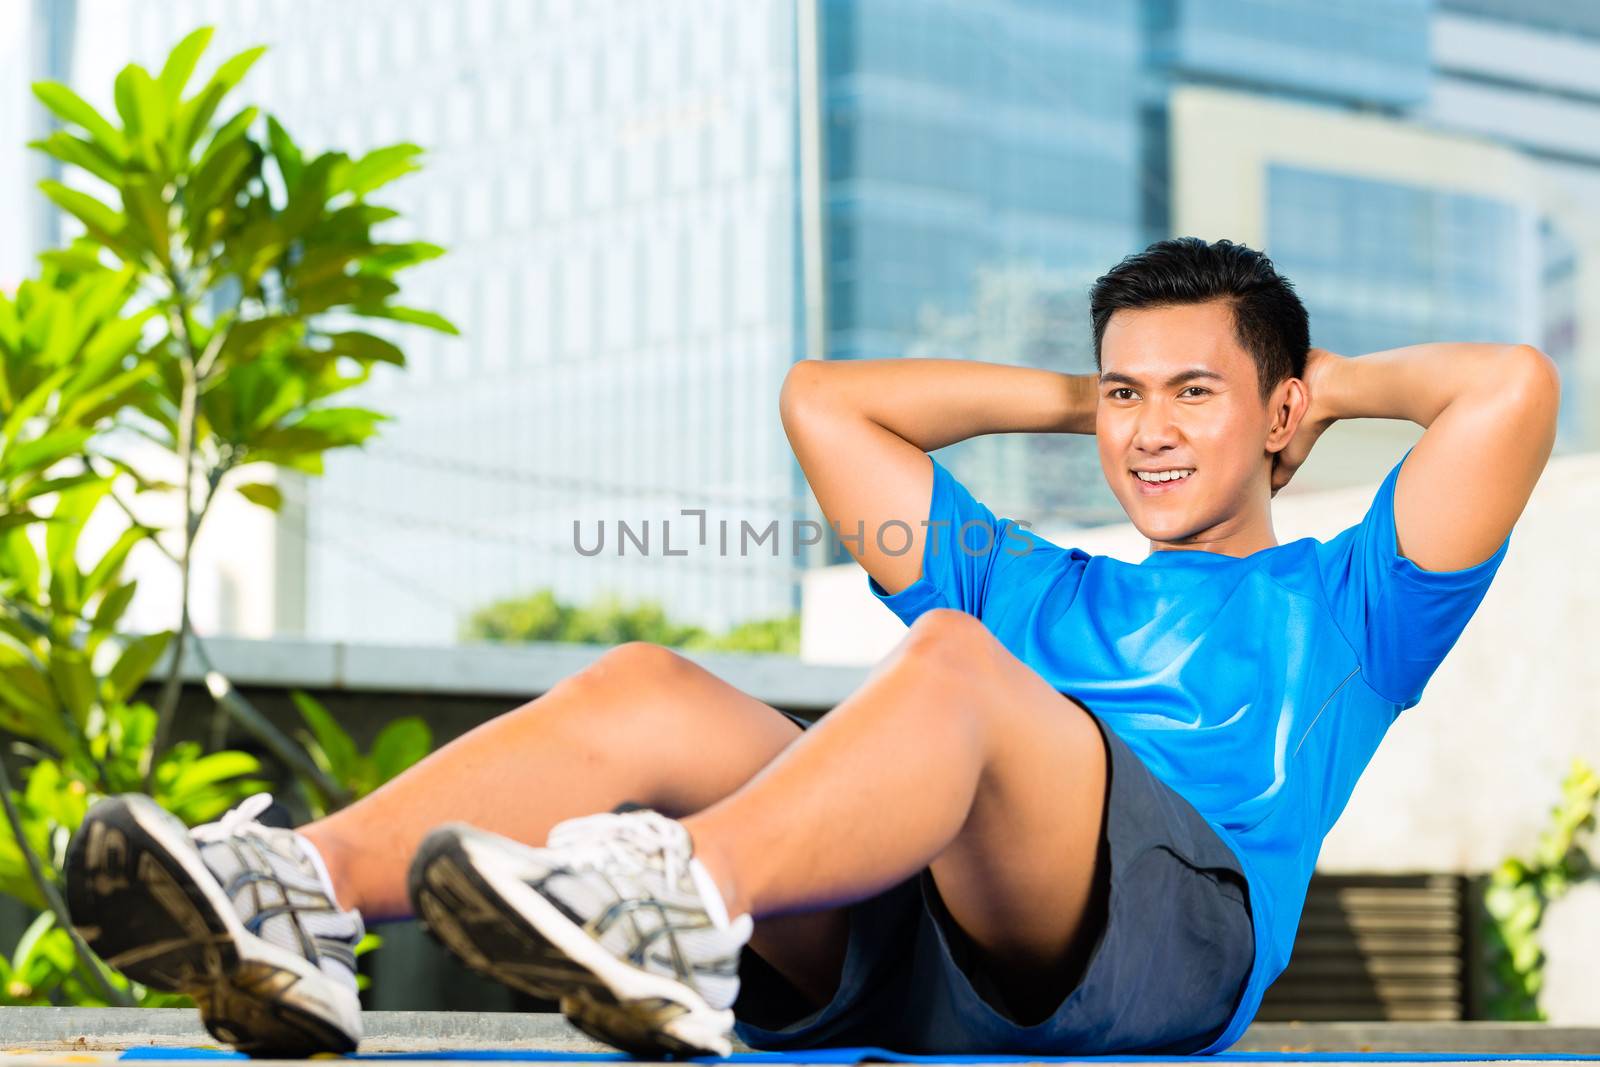 Urban sports - fitness in Asian or Indonesian city by Kzenon